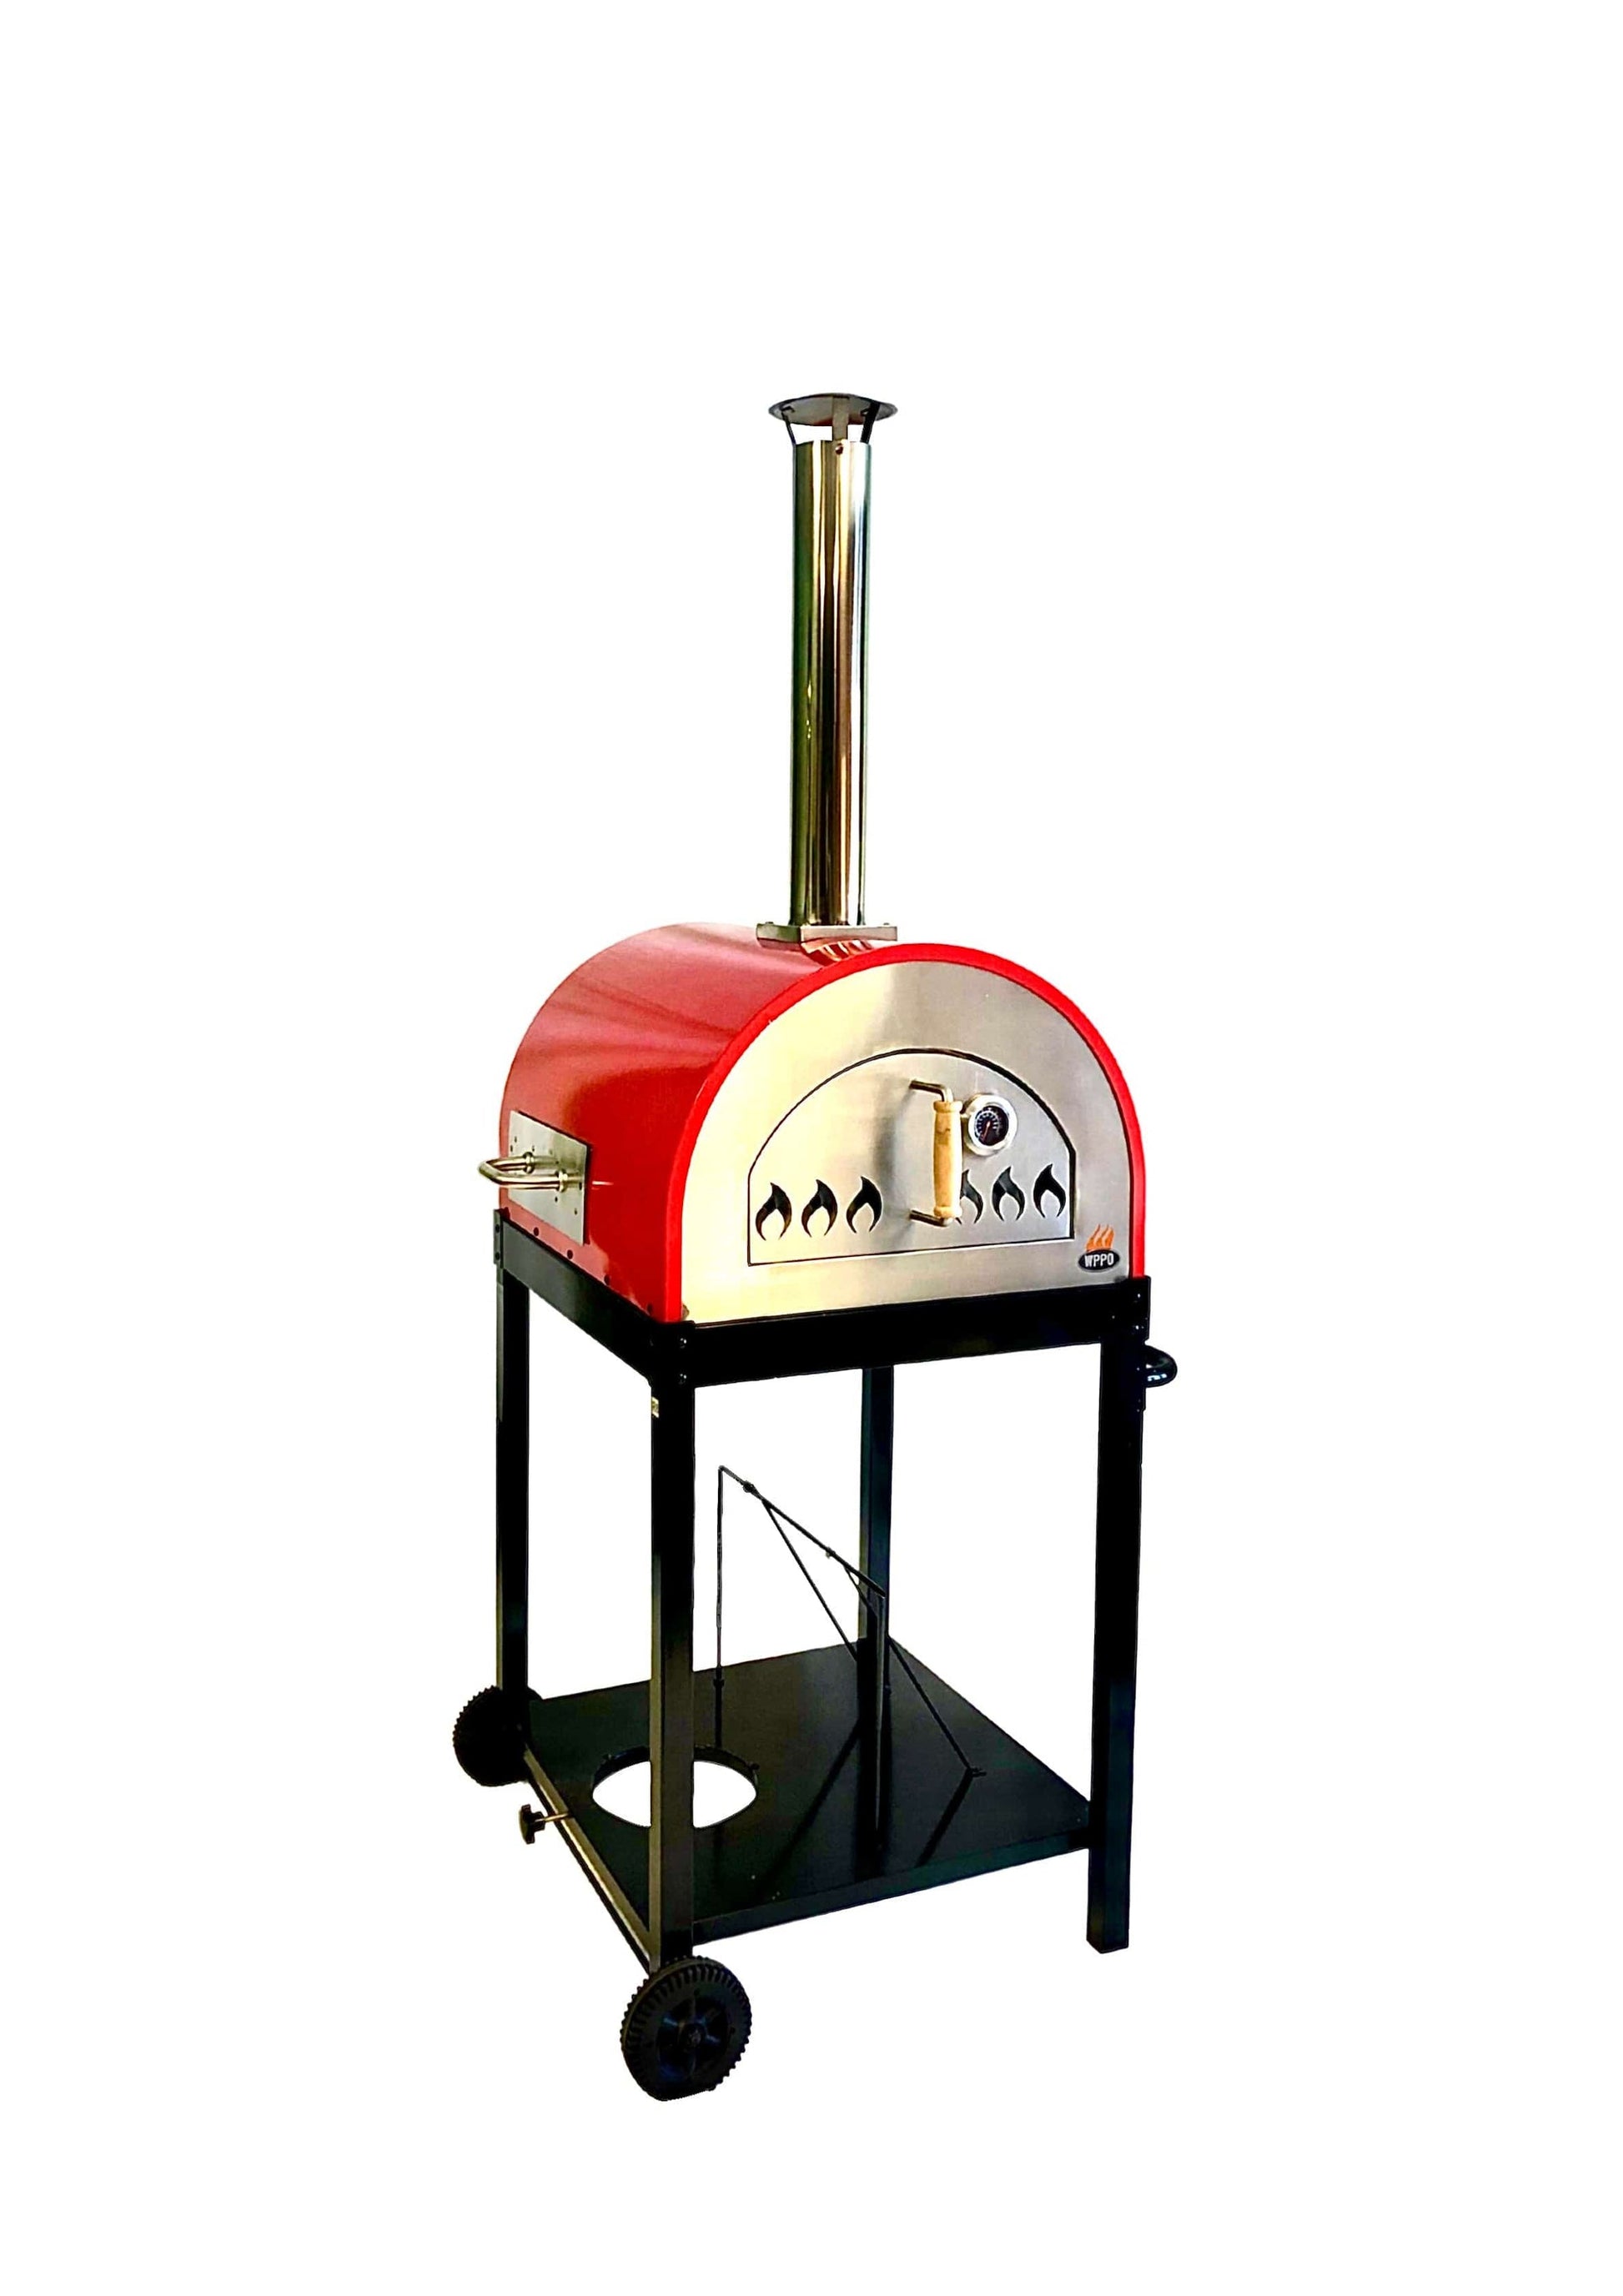 Main image of the WPPO™ Hybrid 25" Hybrid Wood & Gas Pizza Oven [Red or Black] (SKU: WKE-04WG-RED) with a solid white background